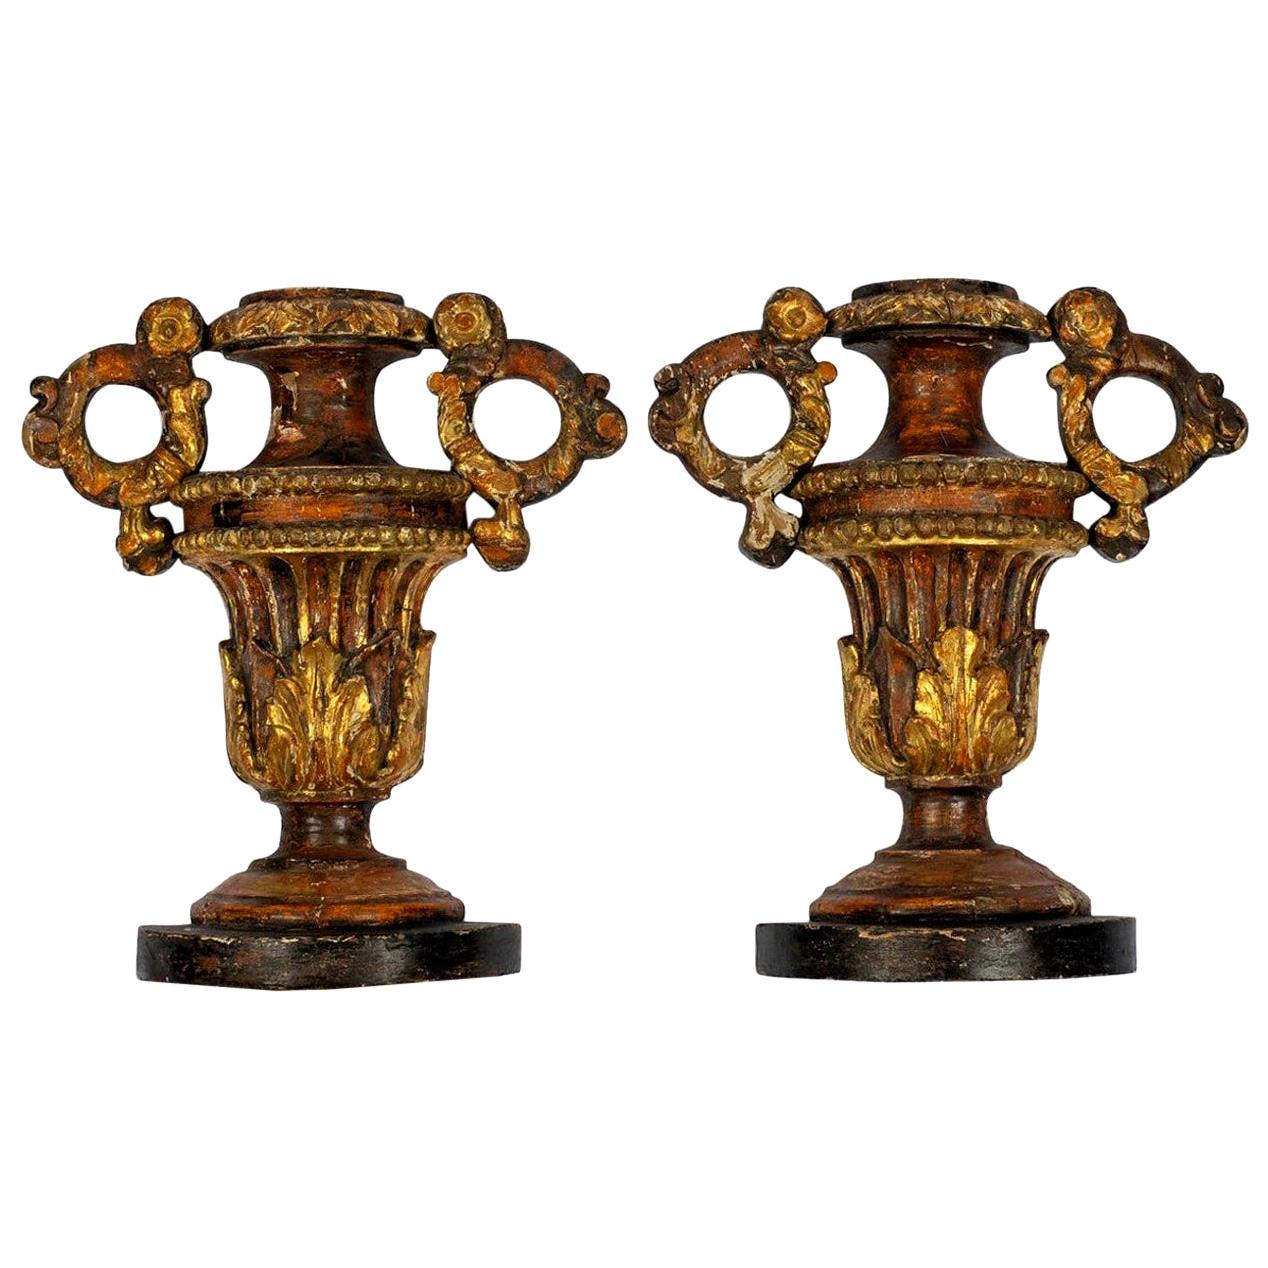 Pair of 18th Century Italian Giltwood Urn Ornaments For Sale